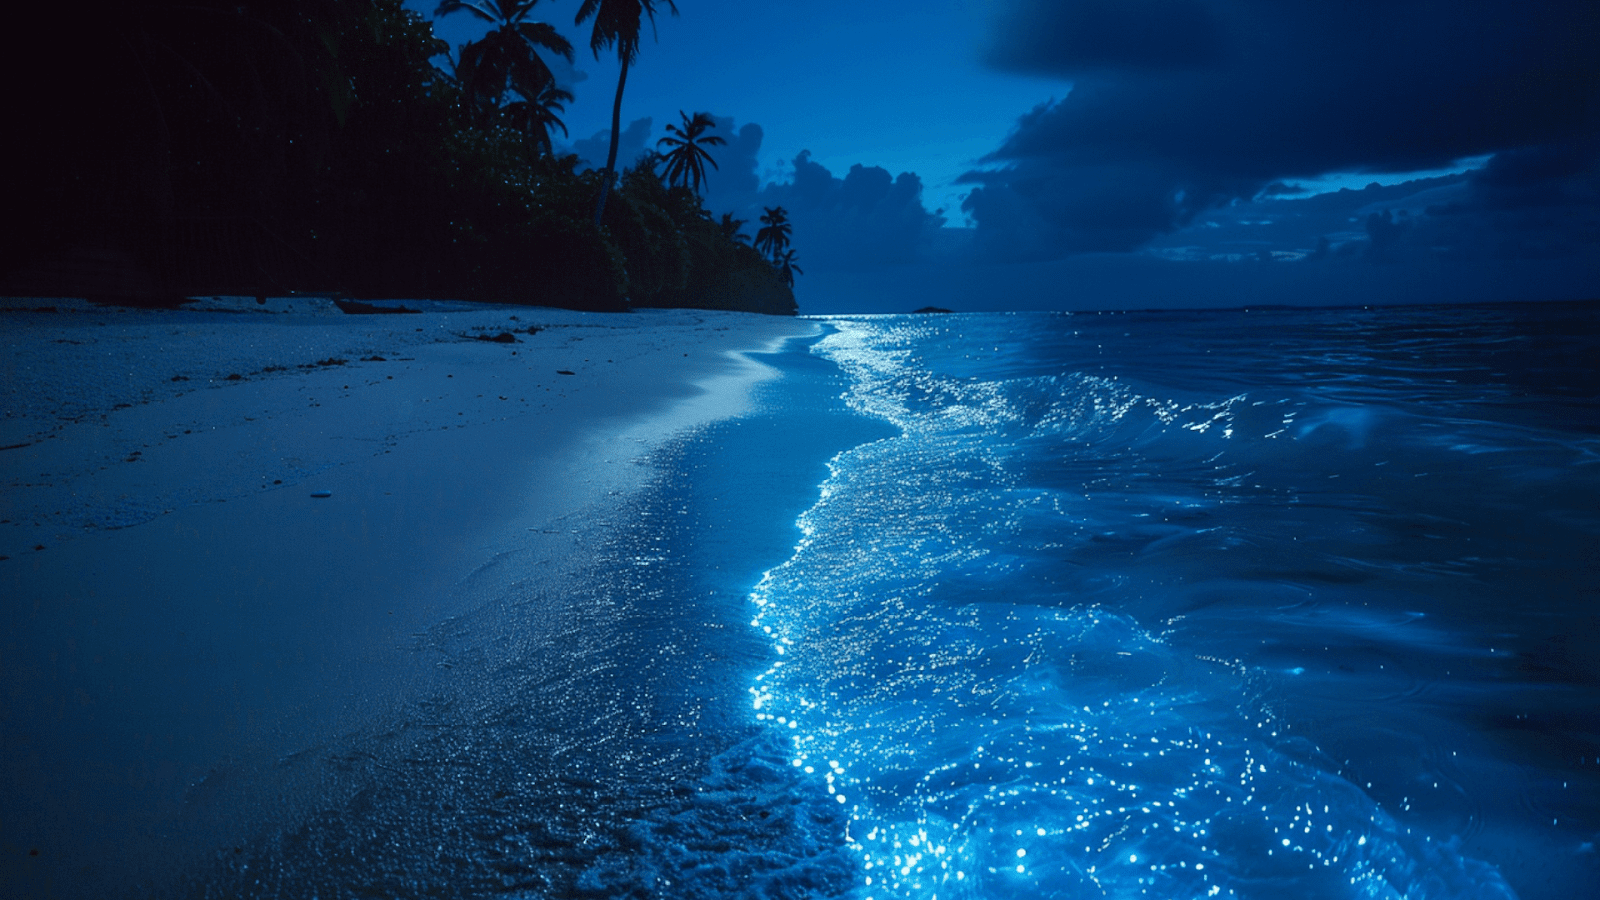 Bioluminescent plankton lighting up the beach at night, a must-see attraction in the Maldives.